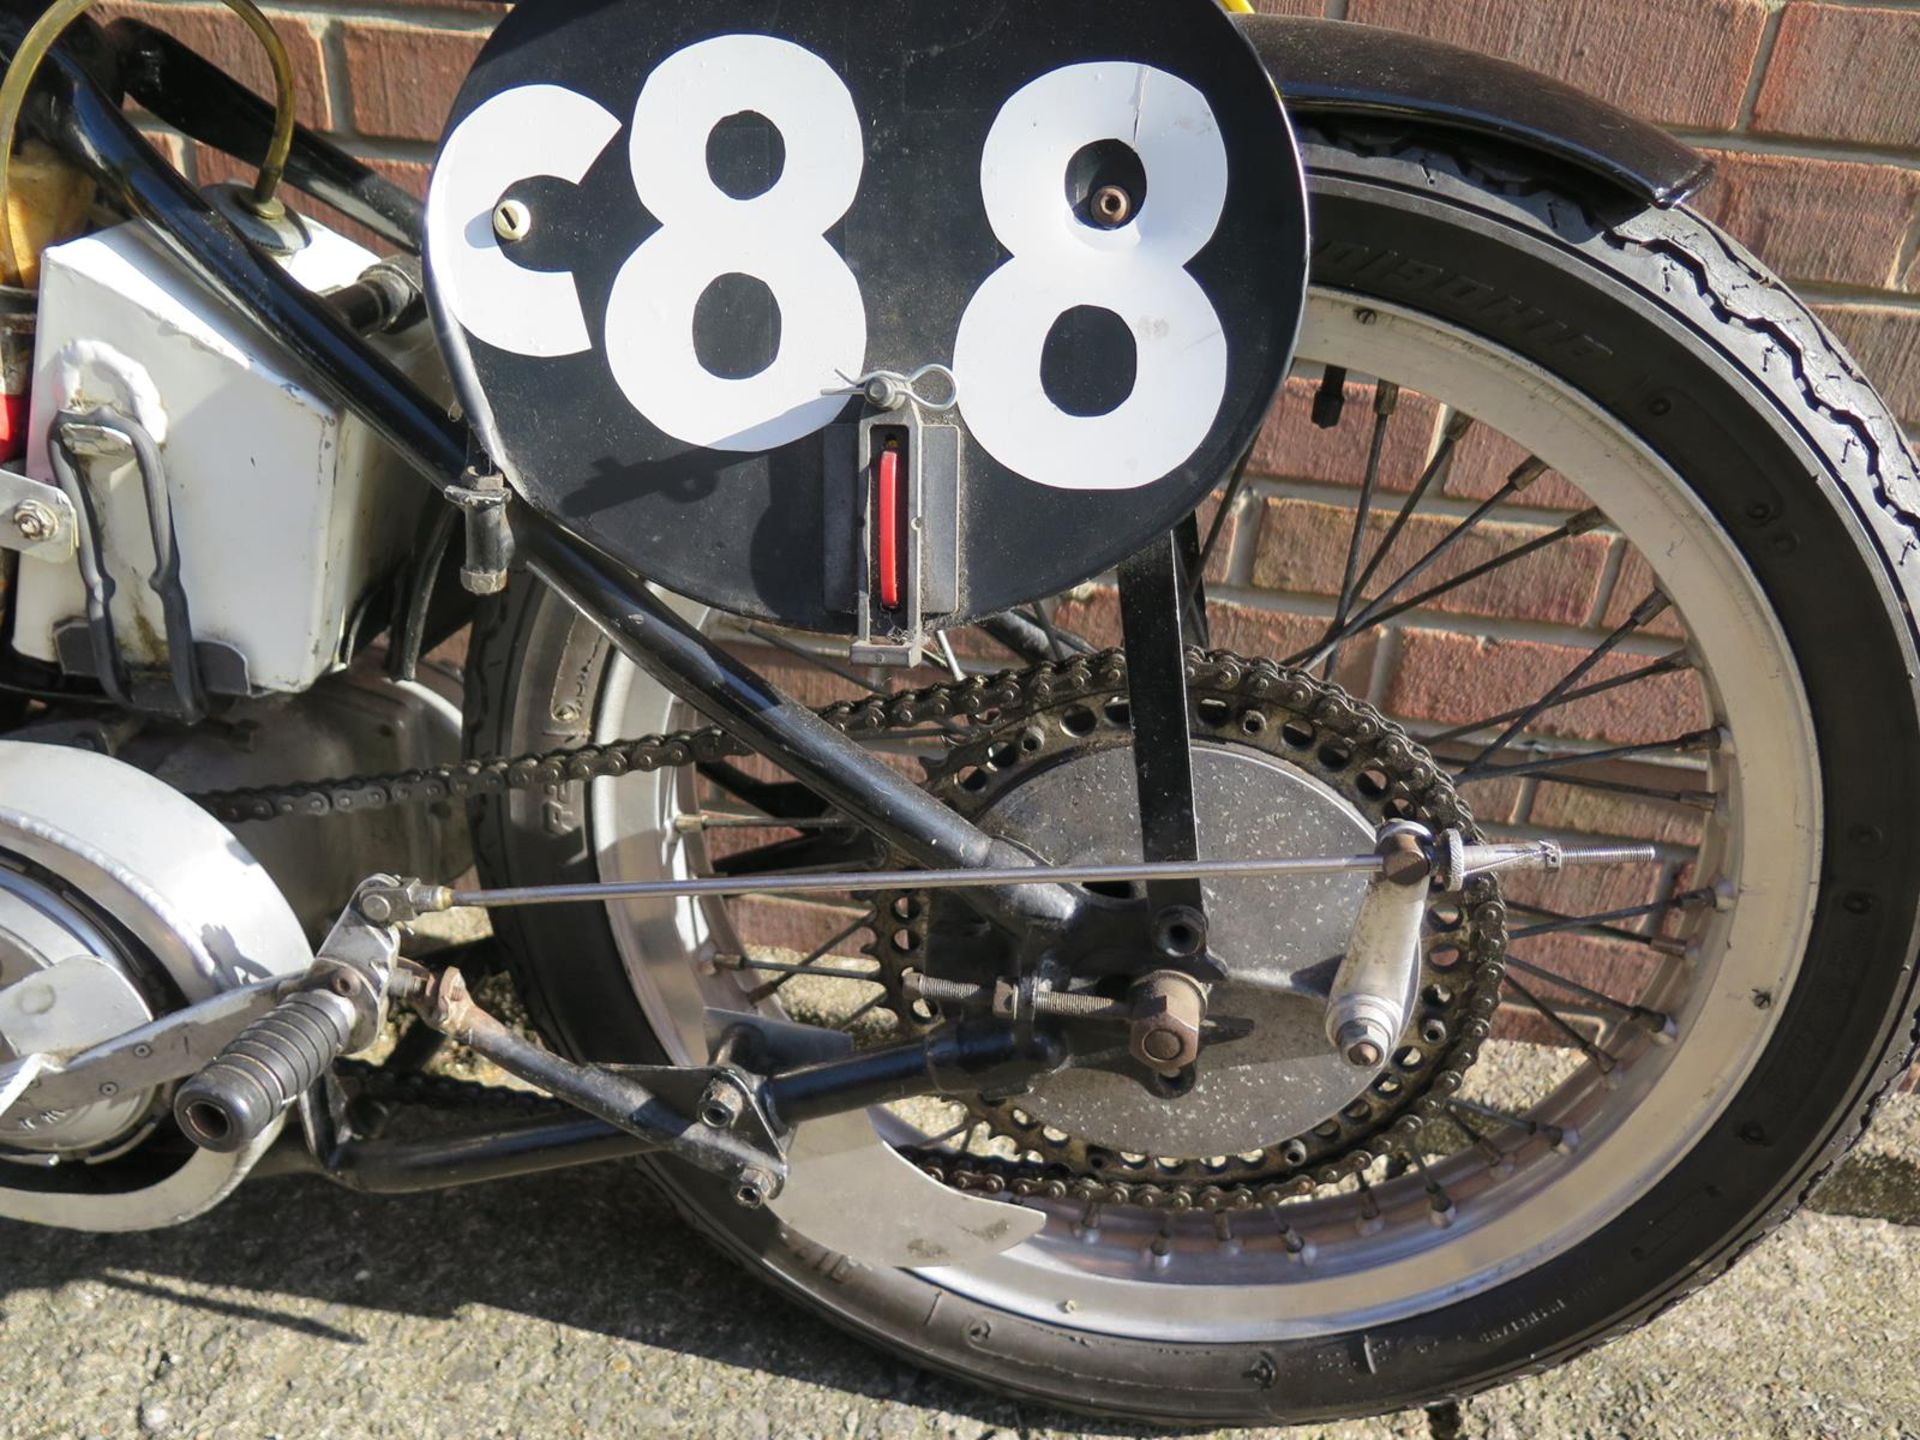 A 1937 Triumph Tiger 70 400 Purchased new in 1937 by Geoffrey Pollard Later converted for racing - Image 3 of 6